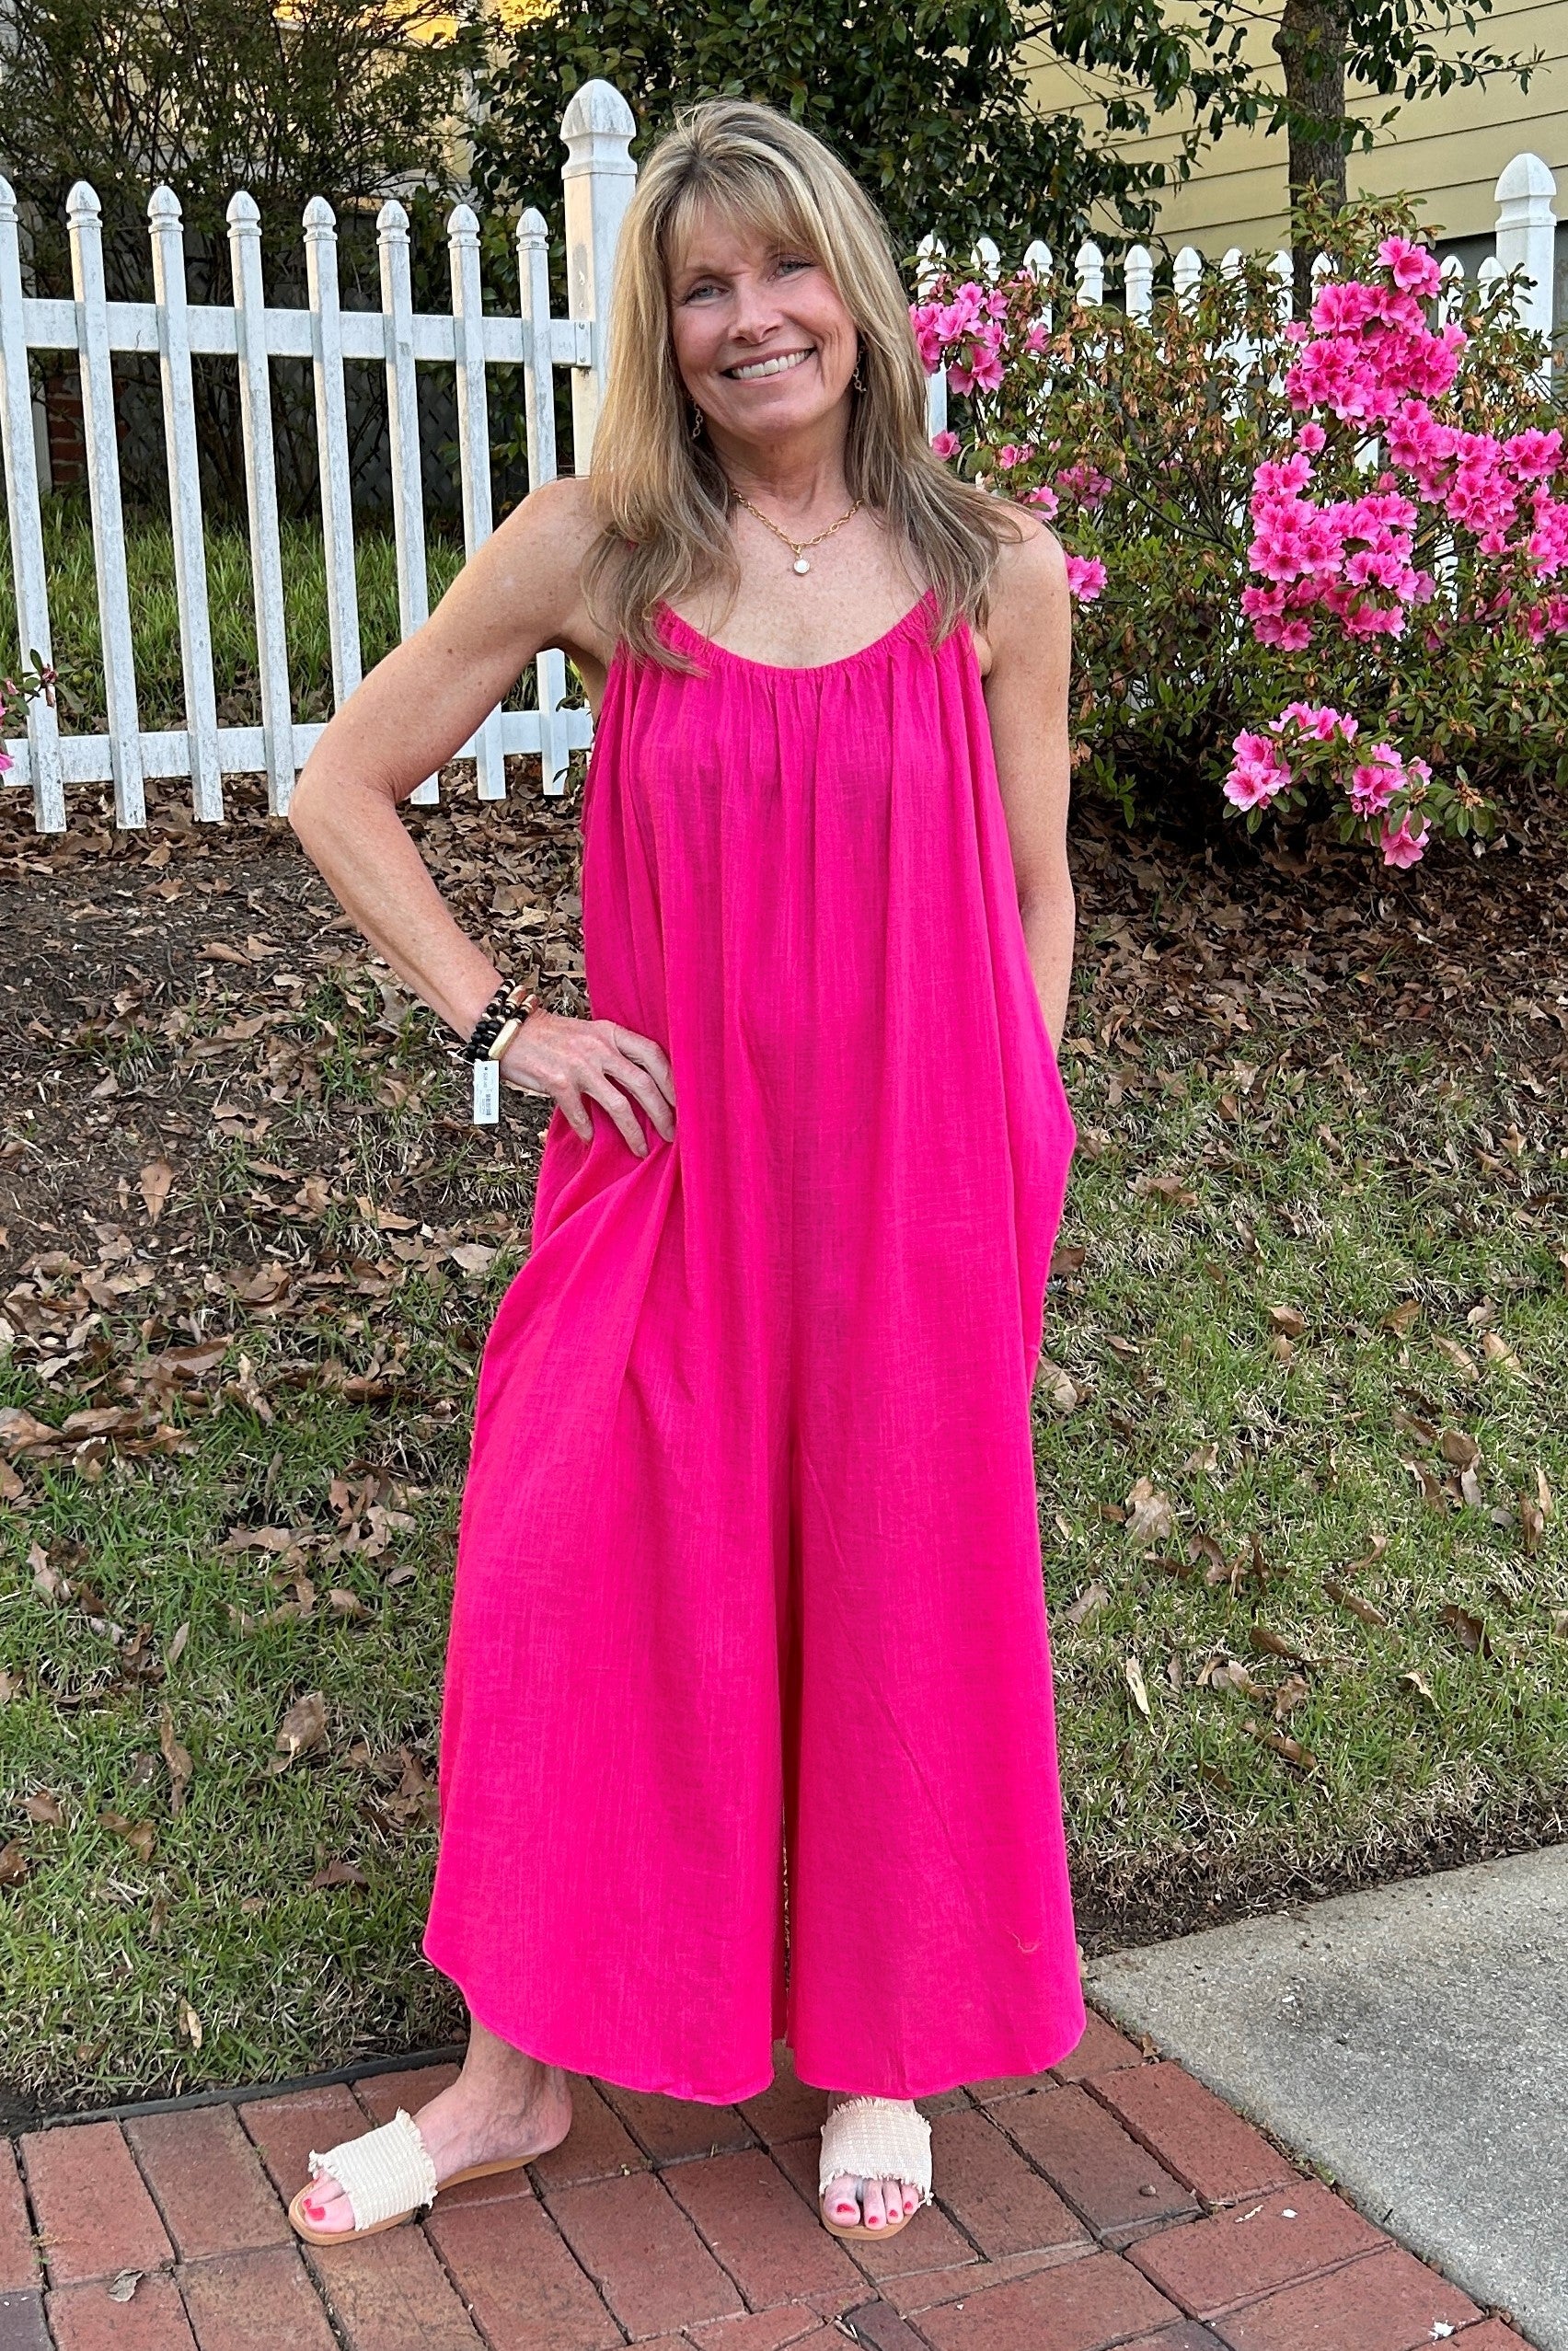 This hot pink spaghetti strap romper is the perfect way to show off your summer style. The top features an elastic neckline, side inset pockets and bottom romper to ensure a comfortable fit. Look and feel beautiful in this must-have piece.  Material: 70% Viscose / 30% Linen  Care Instructions: Hand wash cold, line dry, iron low heat